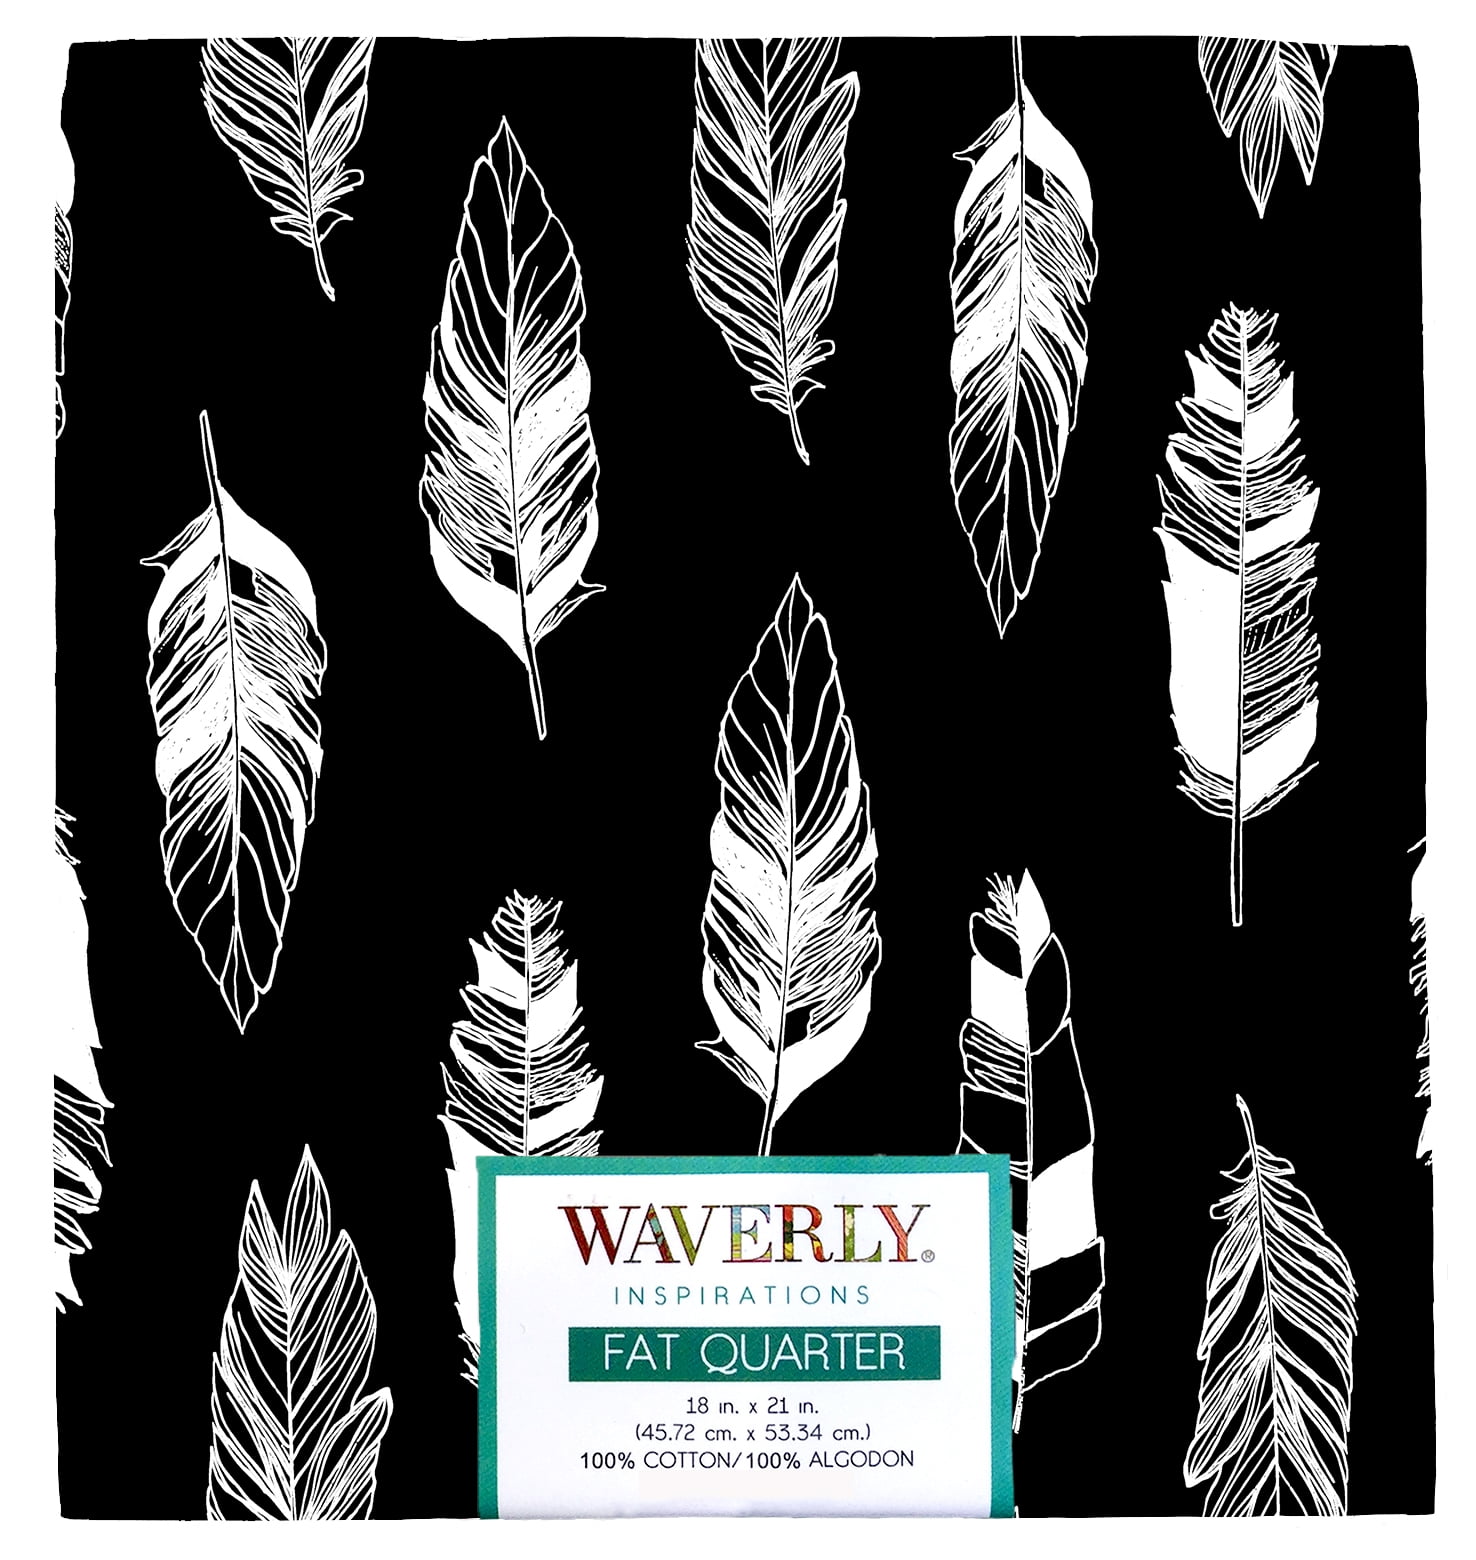 Waverly Inspirations 18" x 21" 100% Cotton Fat Quarter Feathers Onyx Print Quilting & Craft Fabric, 1 Each